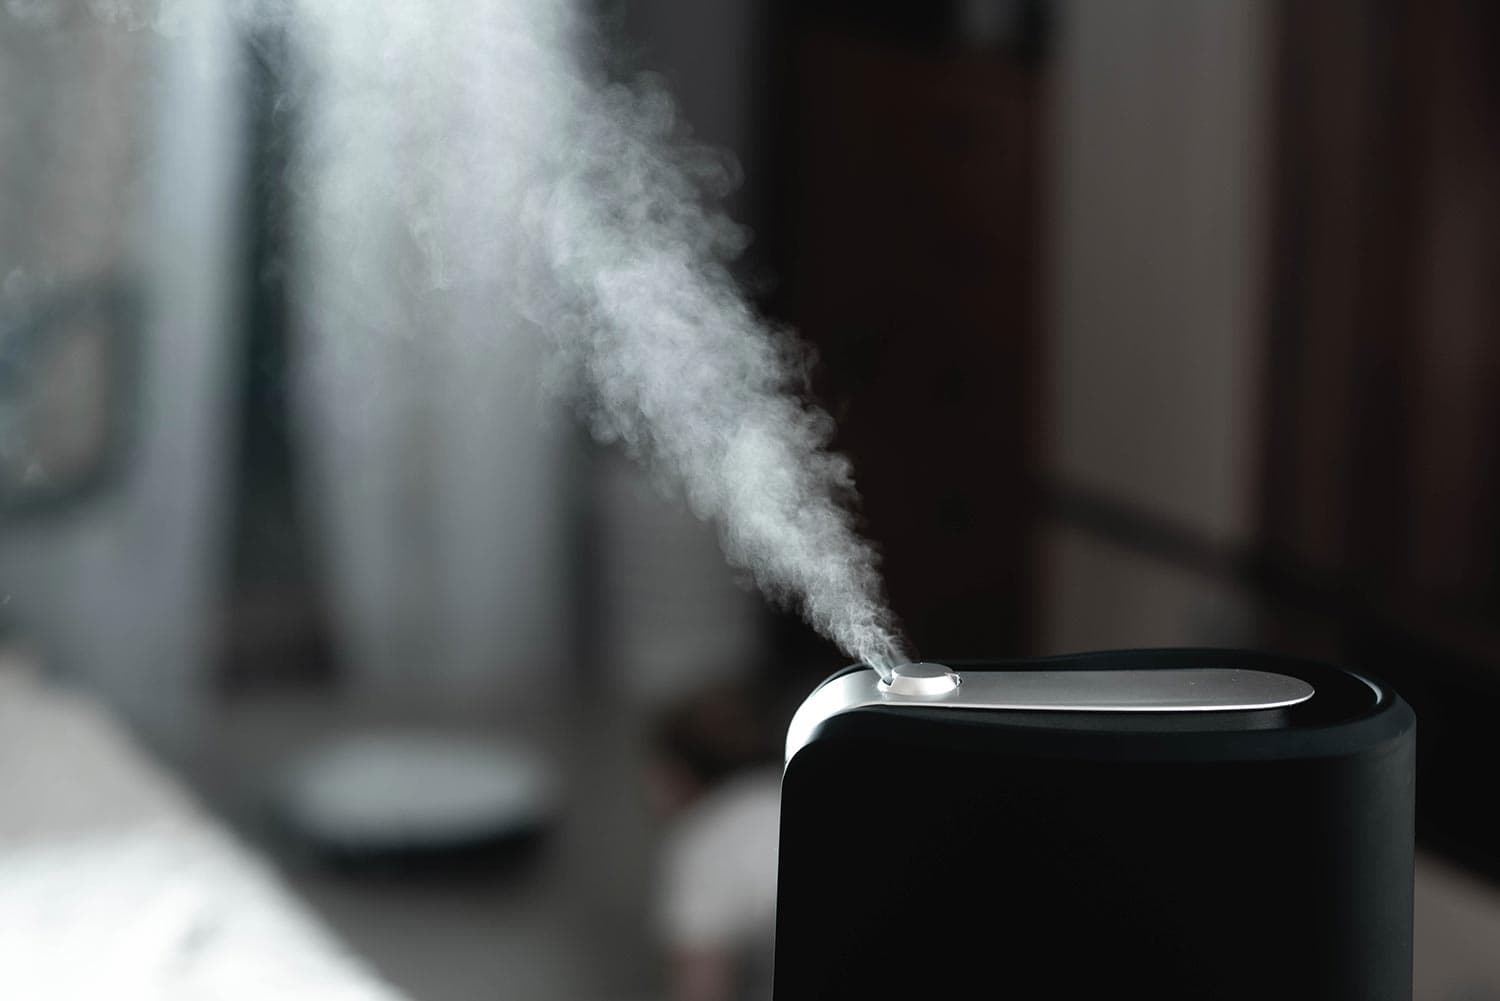 The steam from the humidifier at night in the dark black